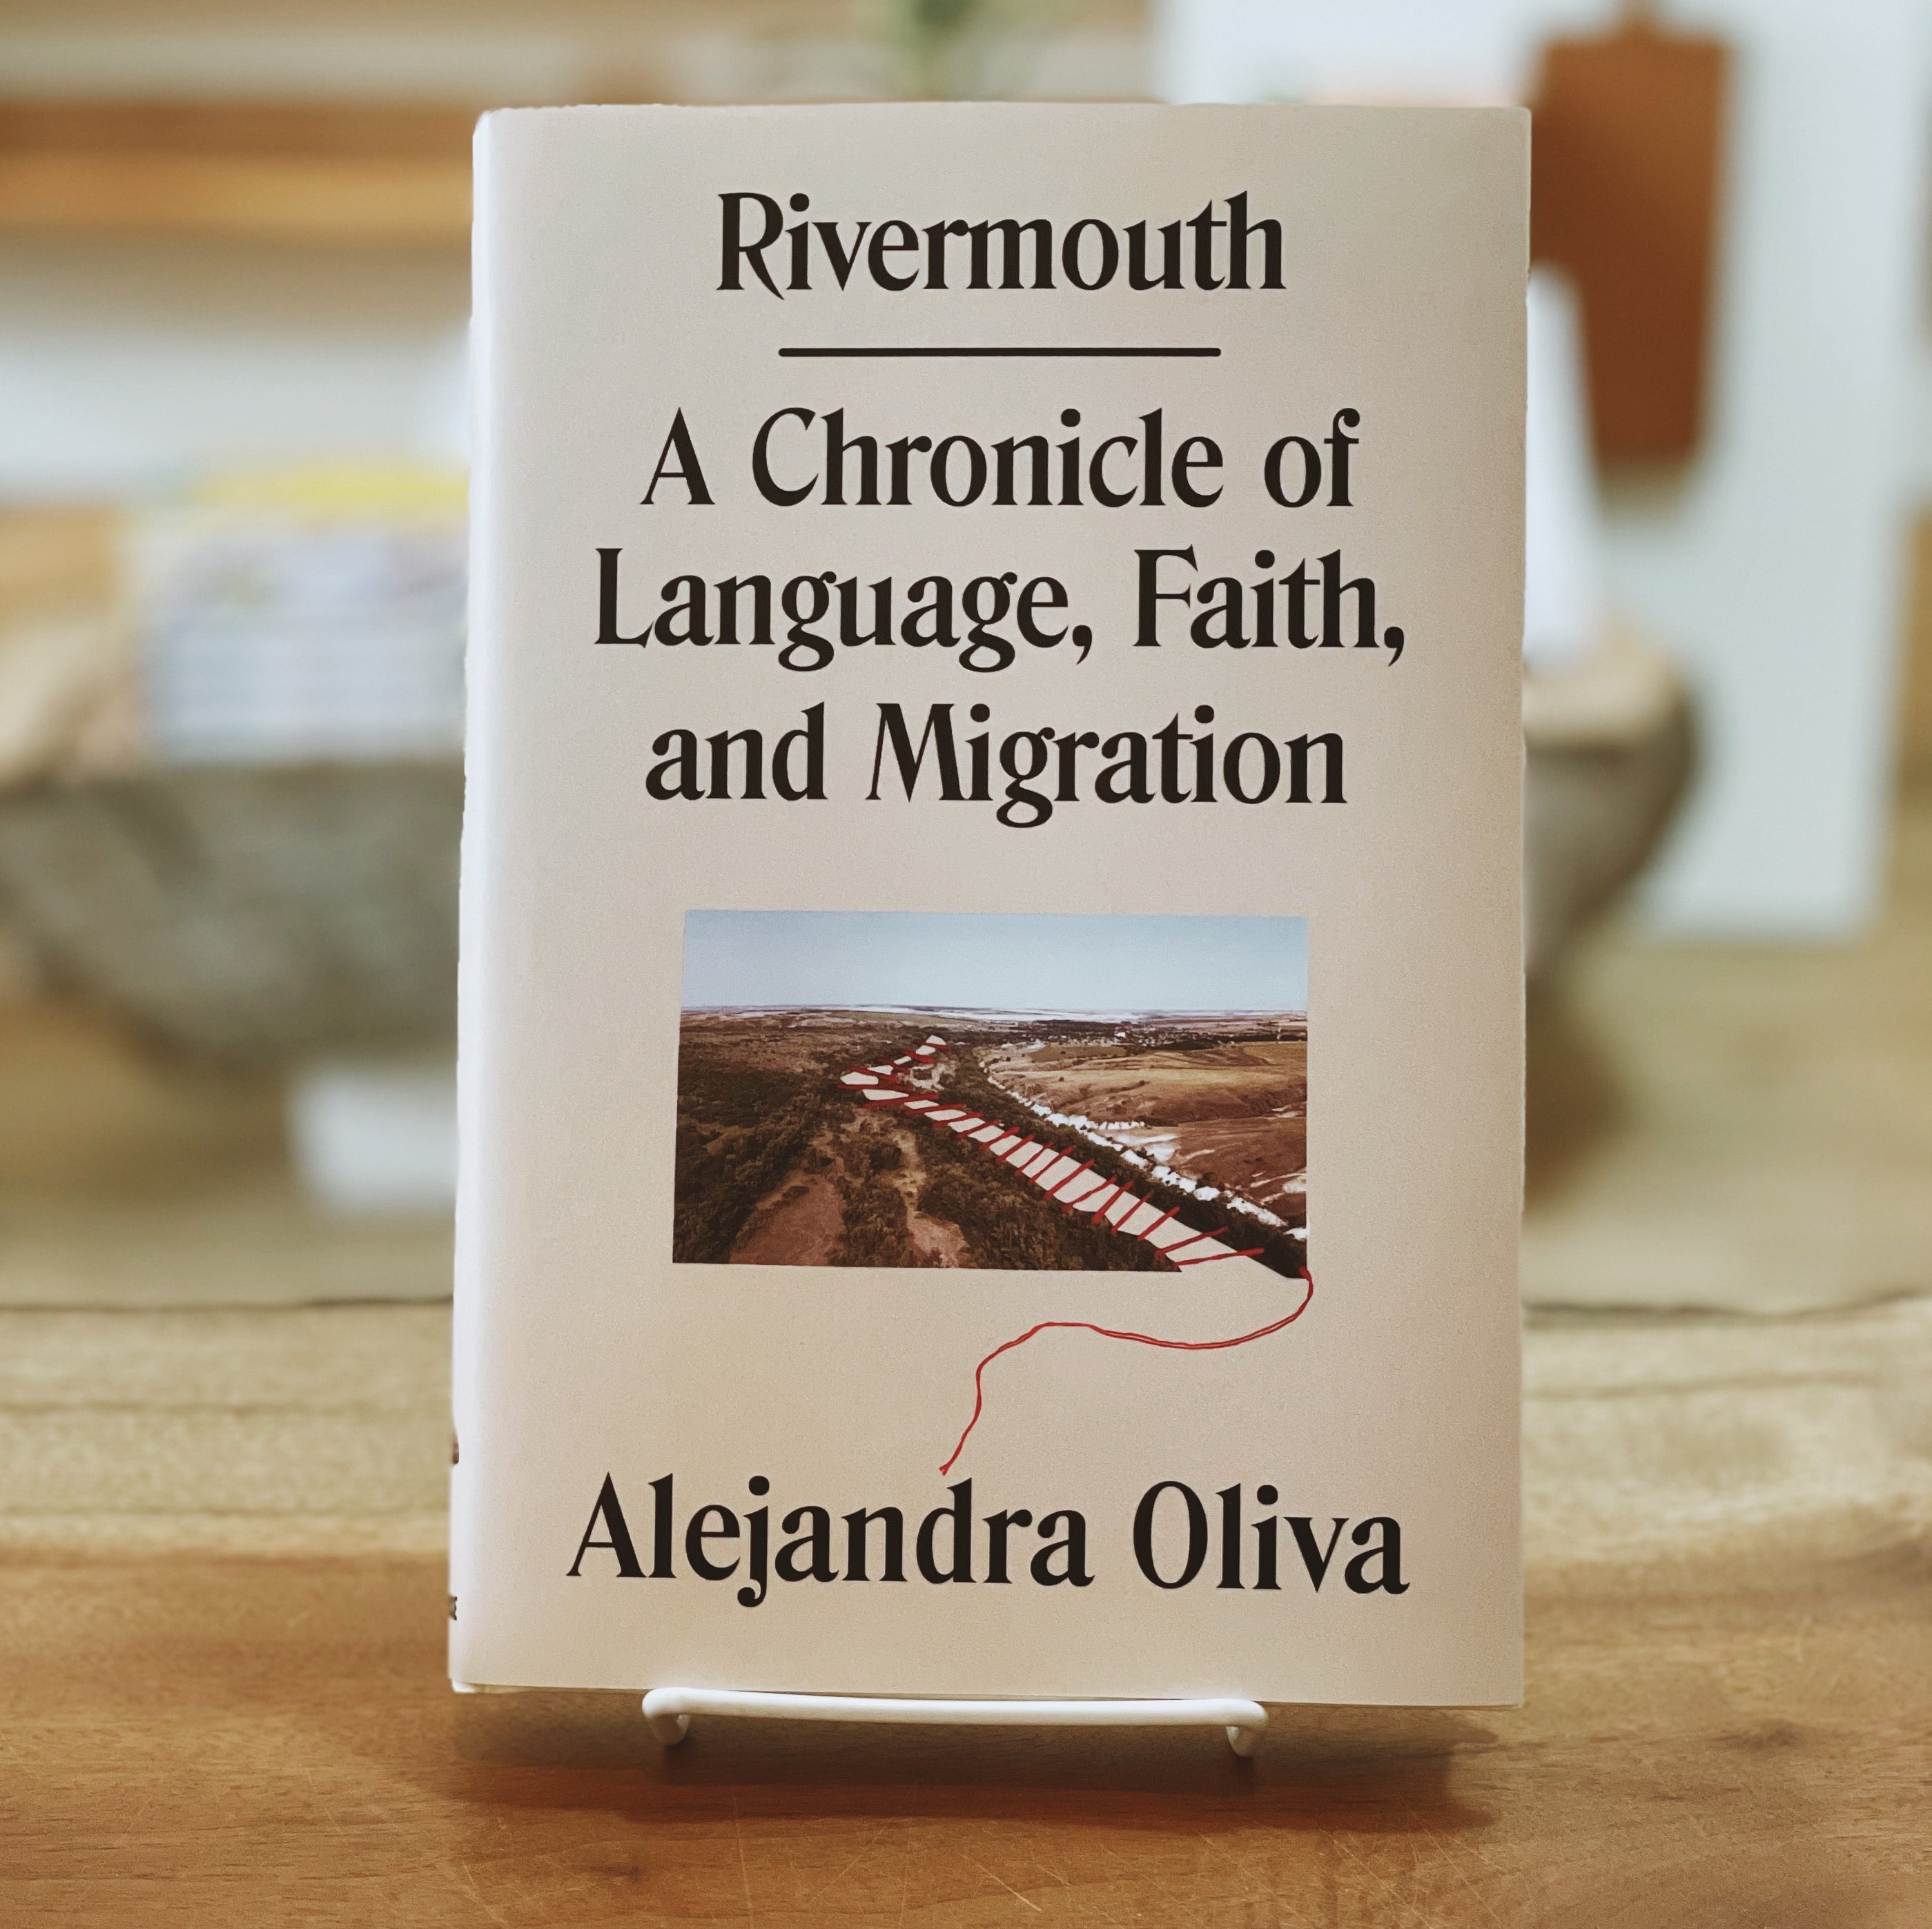 Rivermouth: A Chronicle of Language, Faith, and Migration